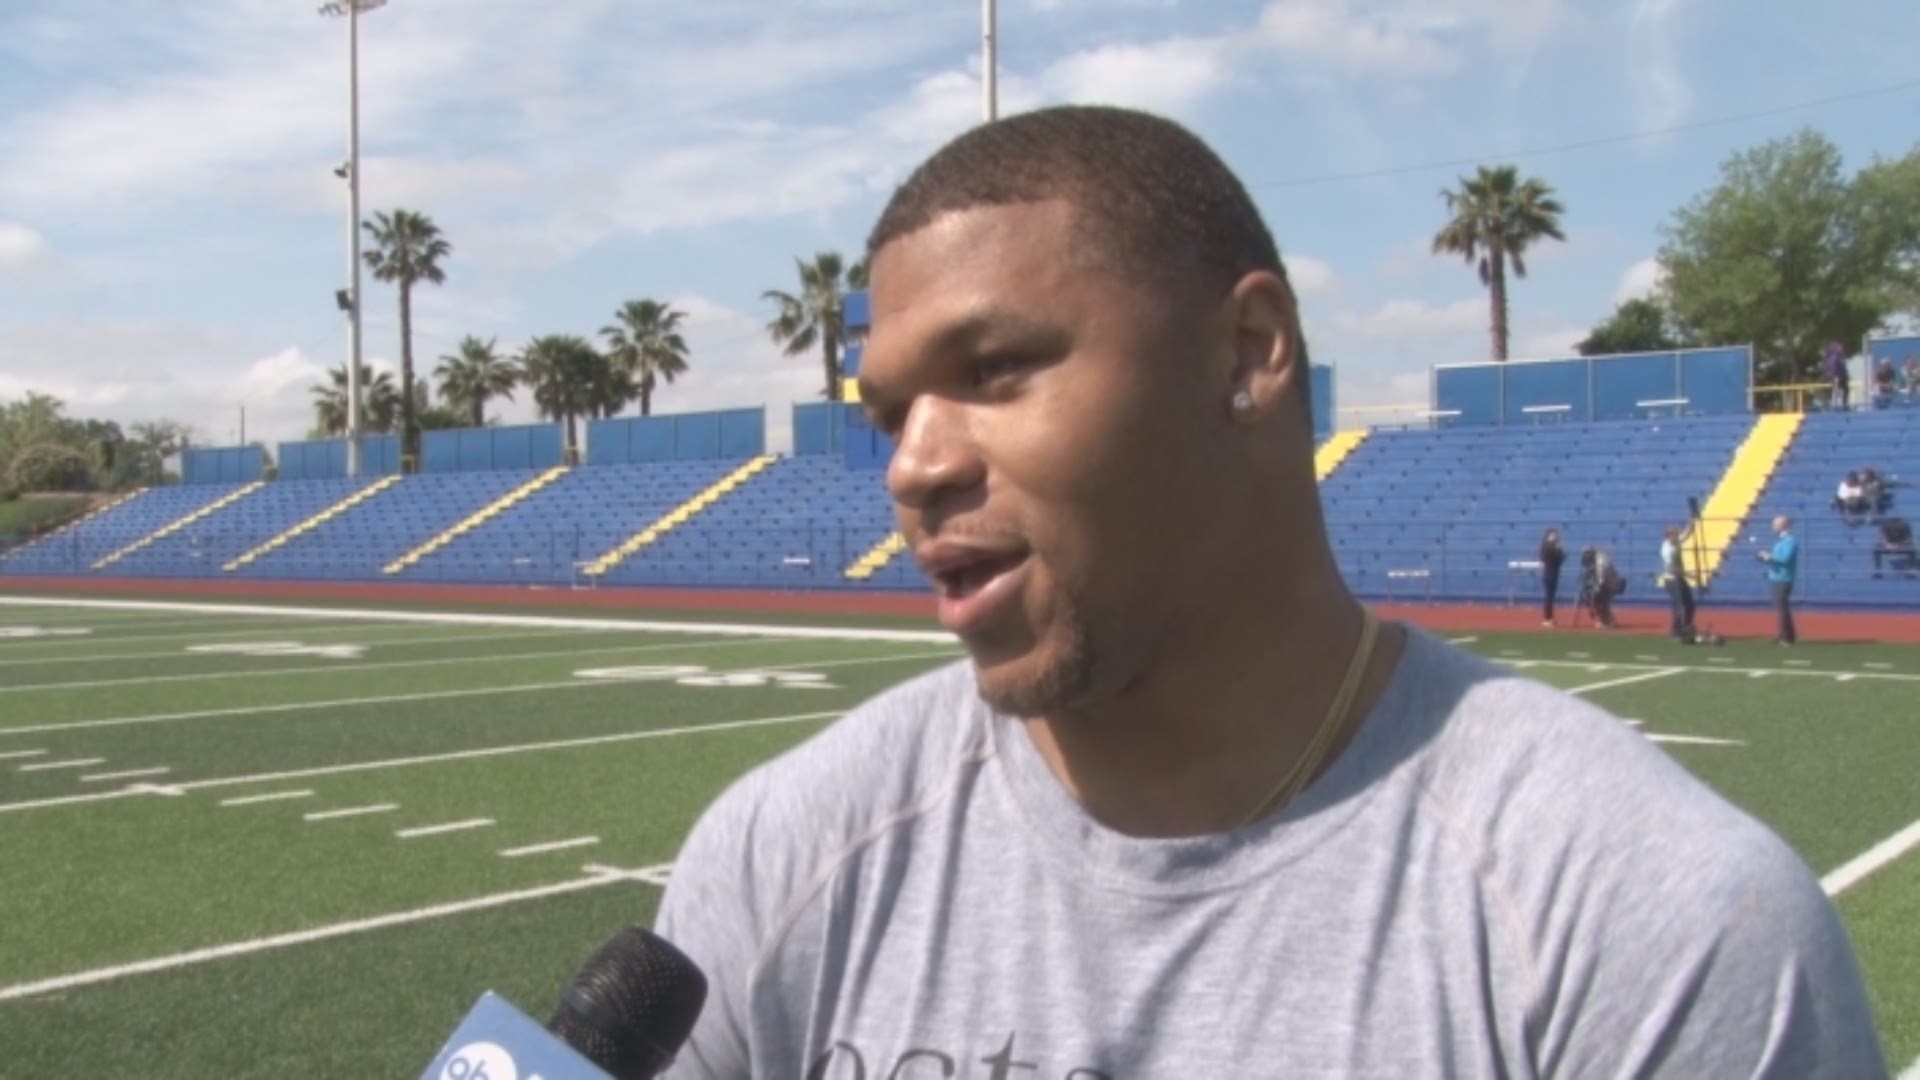 Utah running back Devontae Booker, a former Grant Union High School star, returned to his hometown in Del Paso Heights to hold his "pro-day" in front of NFL scouts in preparation for the Draft on April 28.